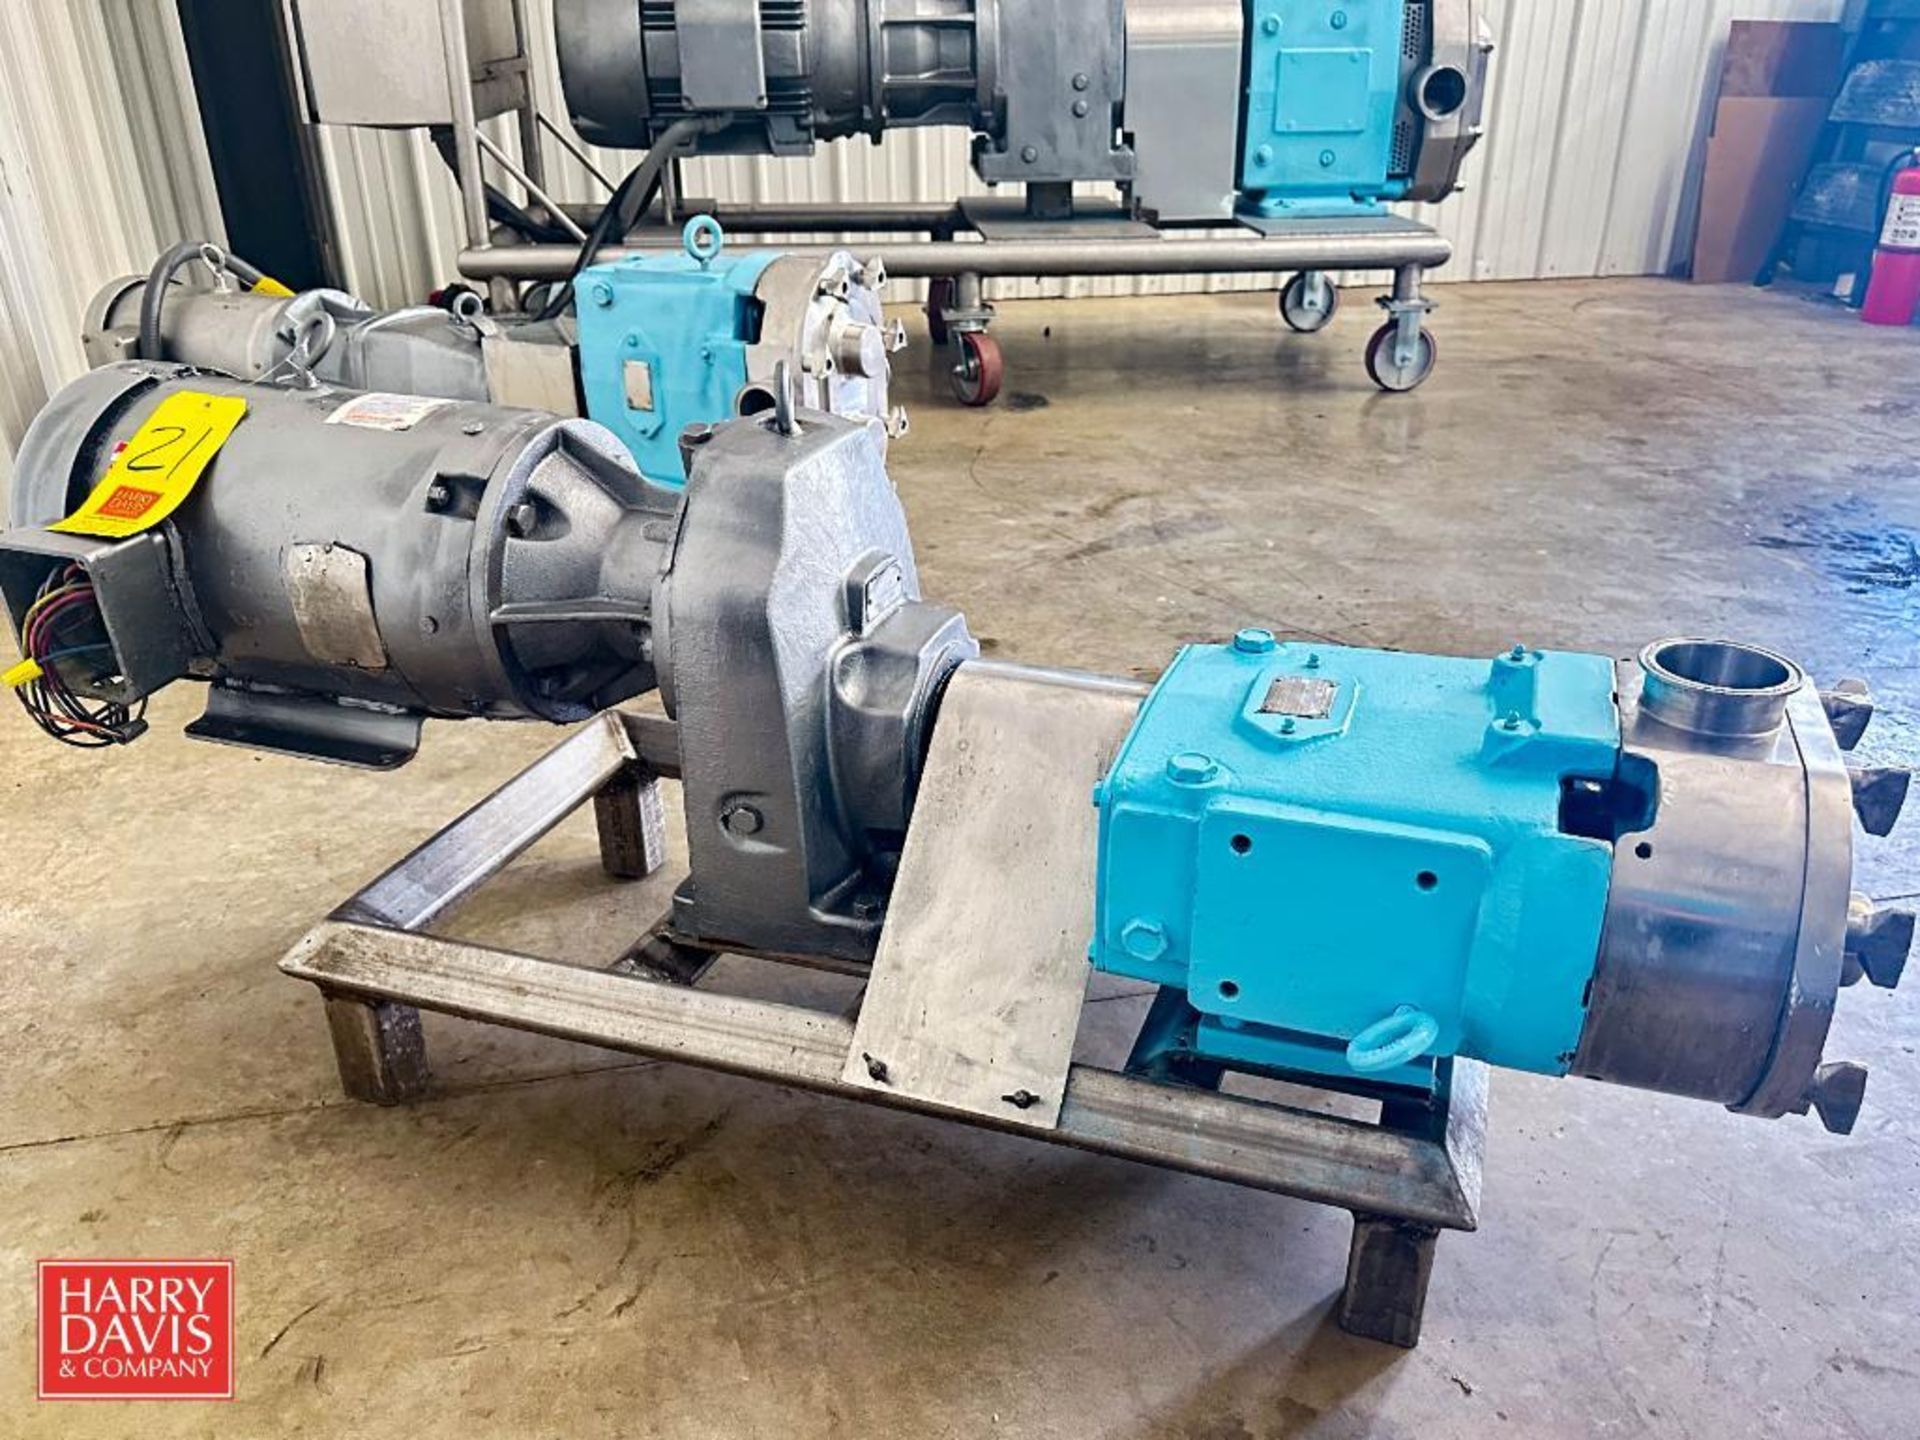 Waukesha Cherry-Burrell Positive Displacement Pump, Model: 120-U1 and Gear Reducing Drive - Image 3 of 5